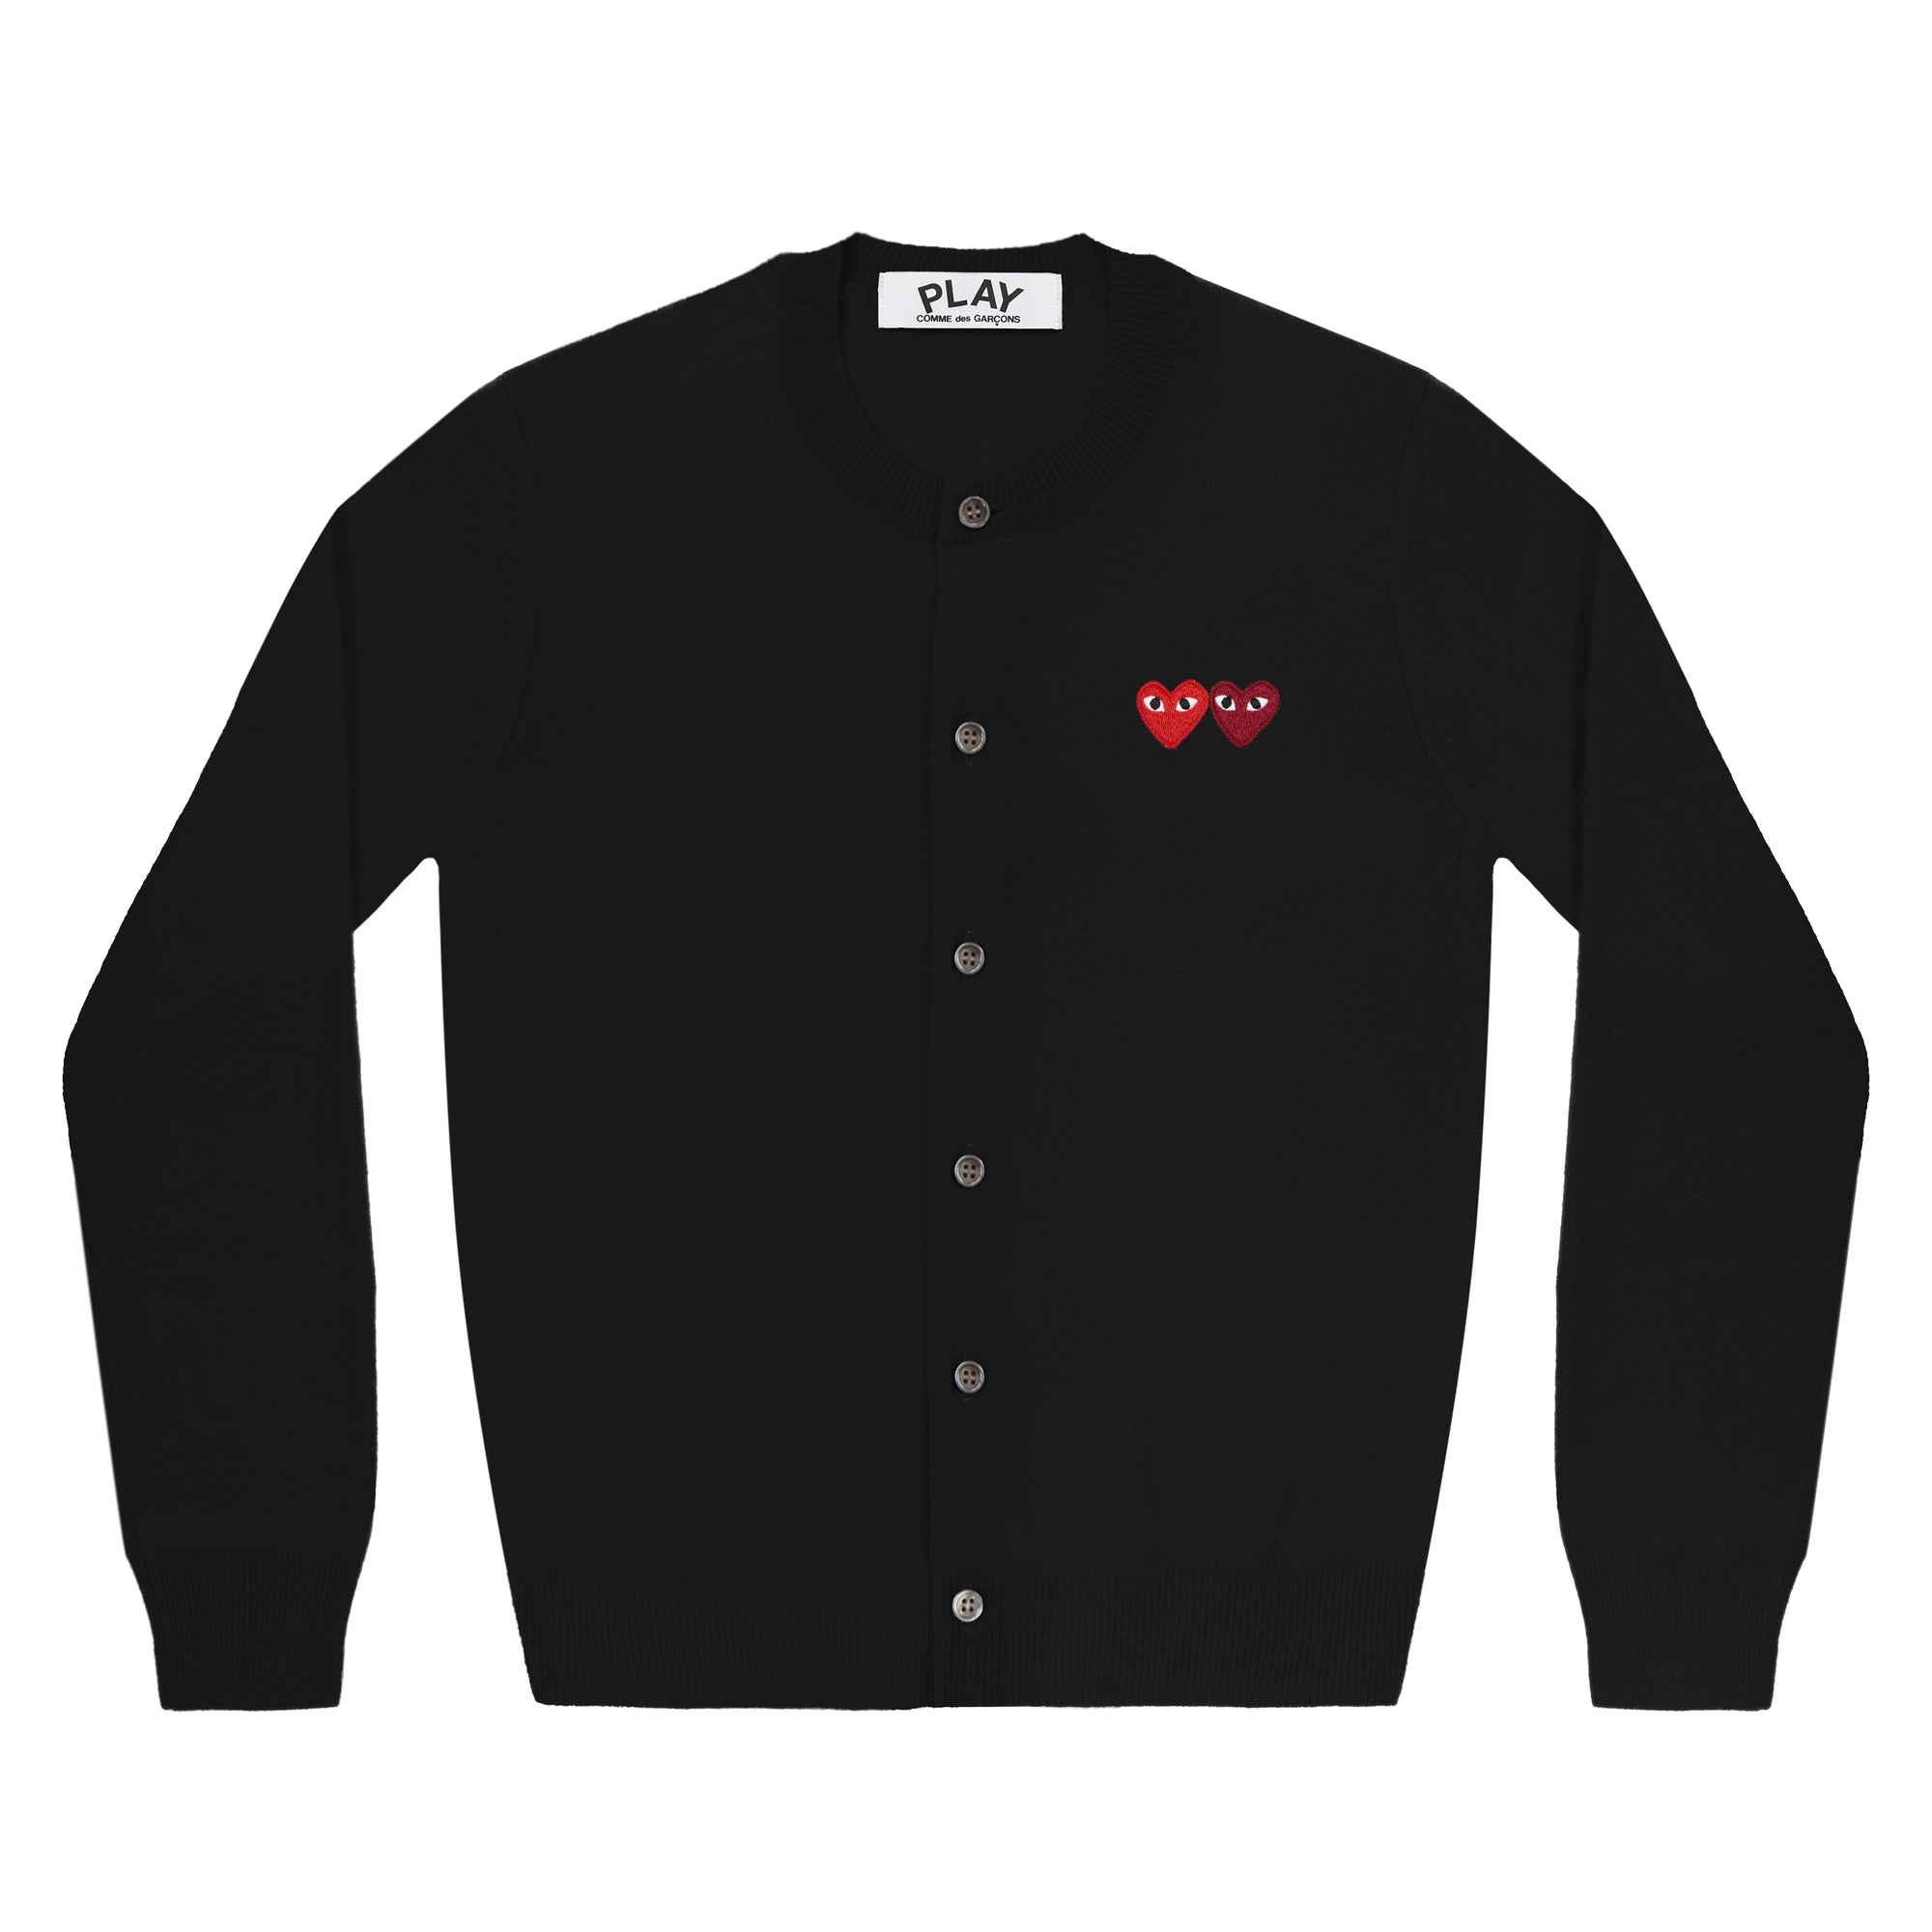 PLAY CDG - DOUBLE HEART LADIE'S CARDIGAN  - (BLACK) view 1